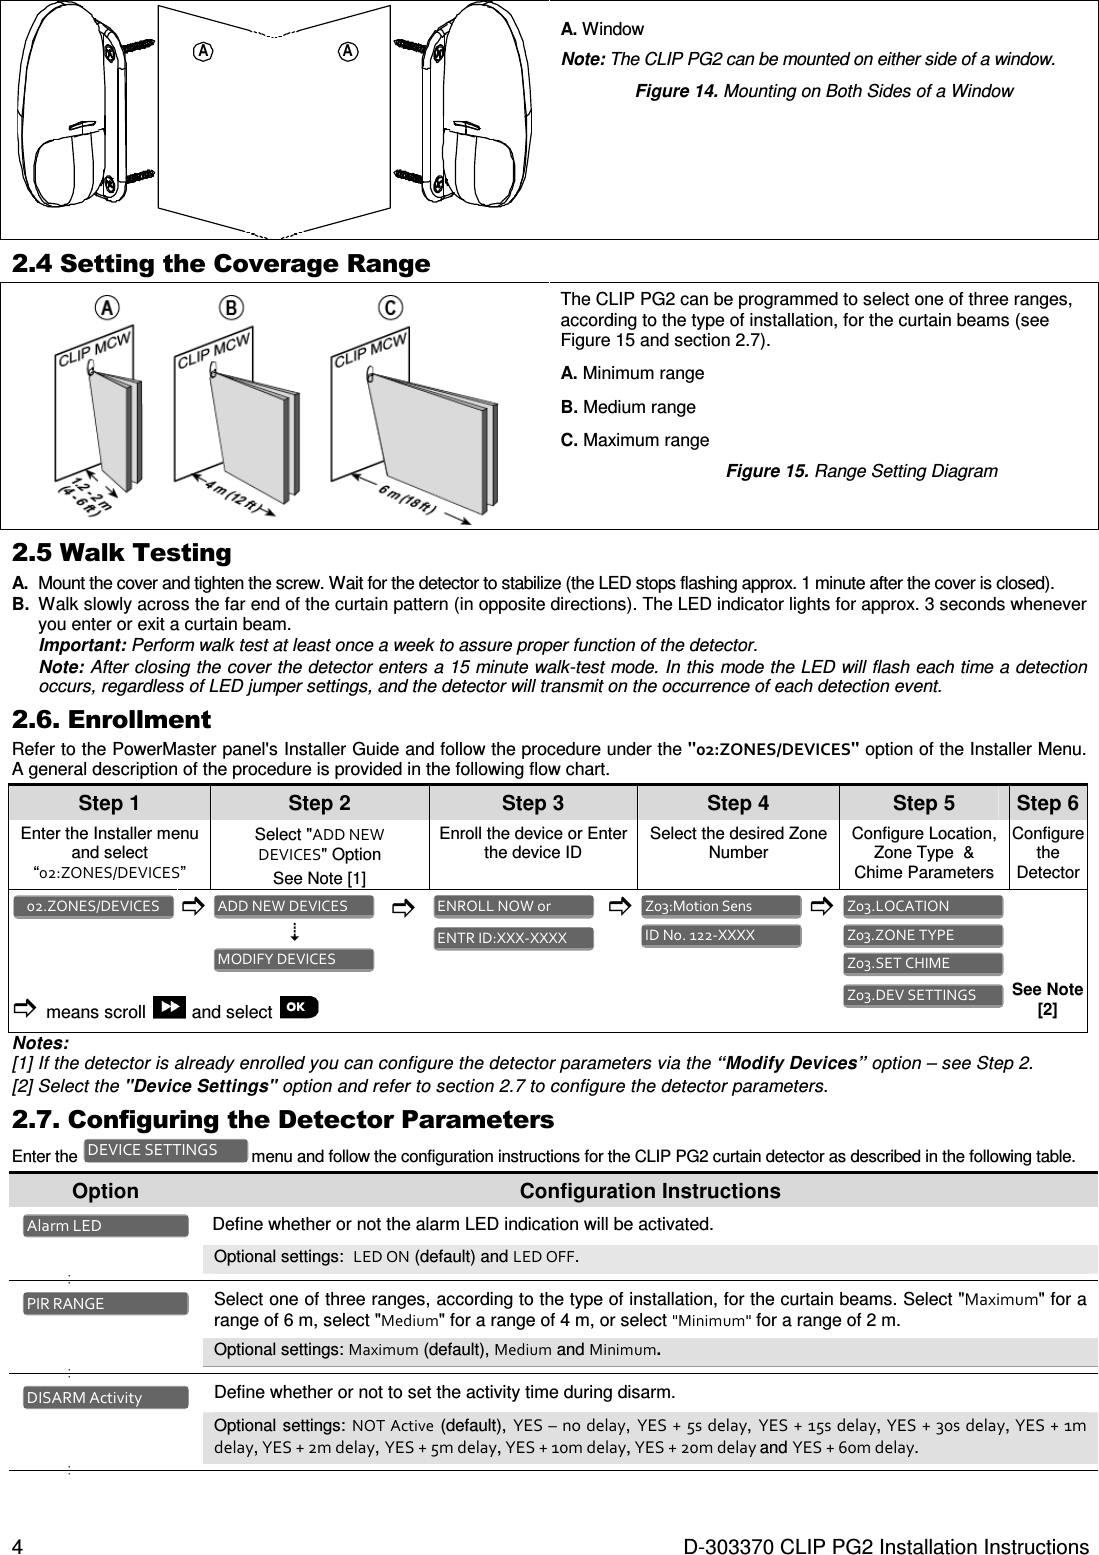 4  D-303370 CLIP PG2 Installation Instructions AA A. Window Note: The CLIP PG2 can be mounted on either side of a window.  Figure 14. Mounting on Both Sides of a Window  2.4 Setting the Coverage Range  The CLIP PG2 can be programmed to select one of three ranges, according to the type of installation, for the curtain beams (see Figure 15 and section 2.7). A. Minimum range B. Medium range C. Maximum range Figure 15. Range Setting Diagram 2.5 Walk Testing  A.  Mount the cover and tighten the screw. Wait for the detector to stabilize (the LED stops flashing approx. 1 minute after the cover is closed).  B.  Walk slowly across the far end of the curtain pattern (in opposite directions). The LED indicator lights for approx. 3 seconds whenever you enter or exit a curtain beam.  Important: Perform walk test at least once a week to assure proper function of the detector. Note: After closing the cover the detector enters a 15 minute walk-test mode. In this mode the LED will flash each time a detection occurs, regardless of LED jumper settings, and the detector will transmit on the occurrence of each detection event. 2.6. Enrollment Refer to the PowerMaster panel&apos;s Installer Guide and follow the procedure under the &quot;02:ZONES/DEVICES&quot; option of the Installer Menu. A general description of the procedure is provided in the following flow chart. Step 1 Step 2 Step 3 Step 4   Step 5 Step 6 Enter the Installer menu and select “02:ZONES/DEVICES” Select &quot;ADD NEW  DEVICES&quot; Option  See Note [1] Enroll the device or Enter the device ID Select the desired Zone Number  Configure Location, Zone Type  &amp; Chime Parameters Configure the Detector                means scroll   and select        See Note [2] Notes:  [1] If the detector is already enrolled you can configure the detector parameters via the “Modify Devices” option – see Step 2. [2] Select the &quot;Device Settings&quot; option and refer to section 2.7 to configure the detector parameters. 2.7. Configuring the Detector Parameters Enter the   menu and follow the configuration instructions for the CLIP PG2 curtain detector as described in the following table. Option  Configuration Instructions   Define whether or not the alarm LED indication will be activated. Optional settings:  LED ON (default) and LED OFF. •   •     Select one of three ranges, according to the type of installation, for the curtain beams. Select &quot;Maximum&quot; for a range of 6 m, select &quot;Medium&quot; for a range of 4 m, or select &quot;Minimum&quot; for a range of 2 m. Optional settings: Maximum (default), Medium and Minimum. •   •    Define whether or not to set the activity time during disarm.  Optional settings: NOT  Active (default), YES – no delay, YES + 5s delay, YES + 15s delay, YES  + 30s delay, YES + 1m delay, YES + 2m delay, YES + 5m delay, YES + 10m delay, YES + 20m delay and YES + 60m delay. •   •   DISARM Activity PIR RANGE Alarm LED DEVICE SETTINGS Z03.DEV SETTINGS  Z03.SET CHIME  Z03.ZONE TYPE  Z03.LOCATION  ID No. 122-XXXX  Z03:Motion Sens  ENTR ID:XXX-XXXX  ENROLL NOW or  MODIFY DEVICES  ADD NEW DEVICES  02.ZONES/DEVICES  